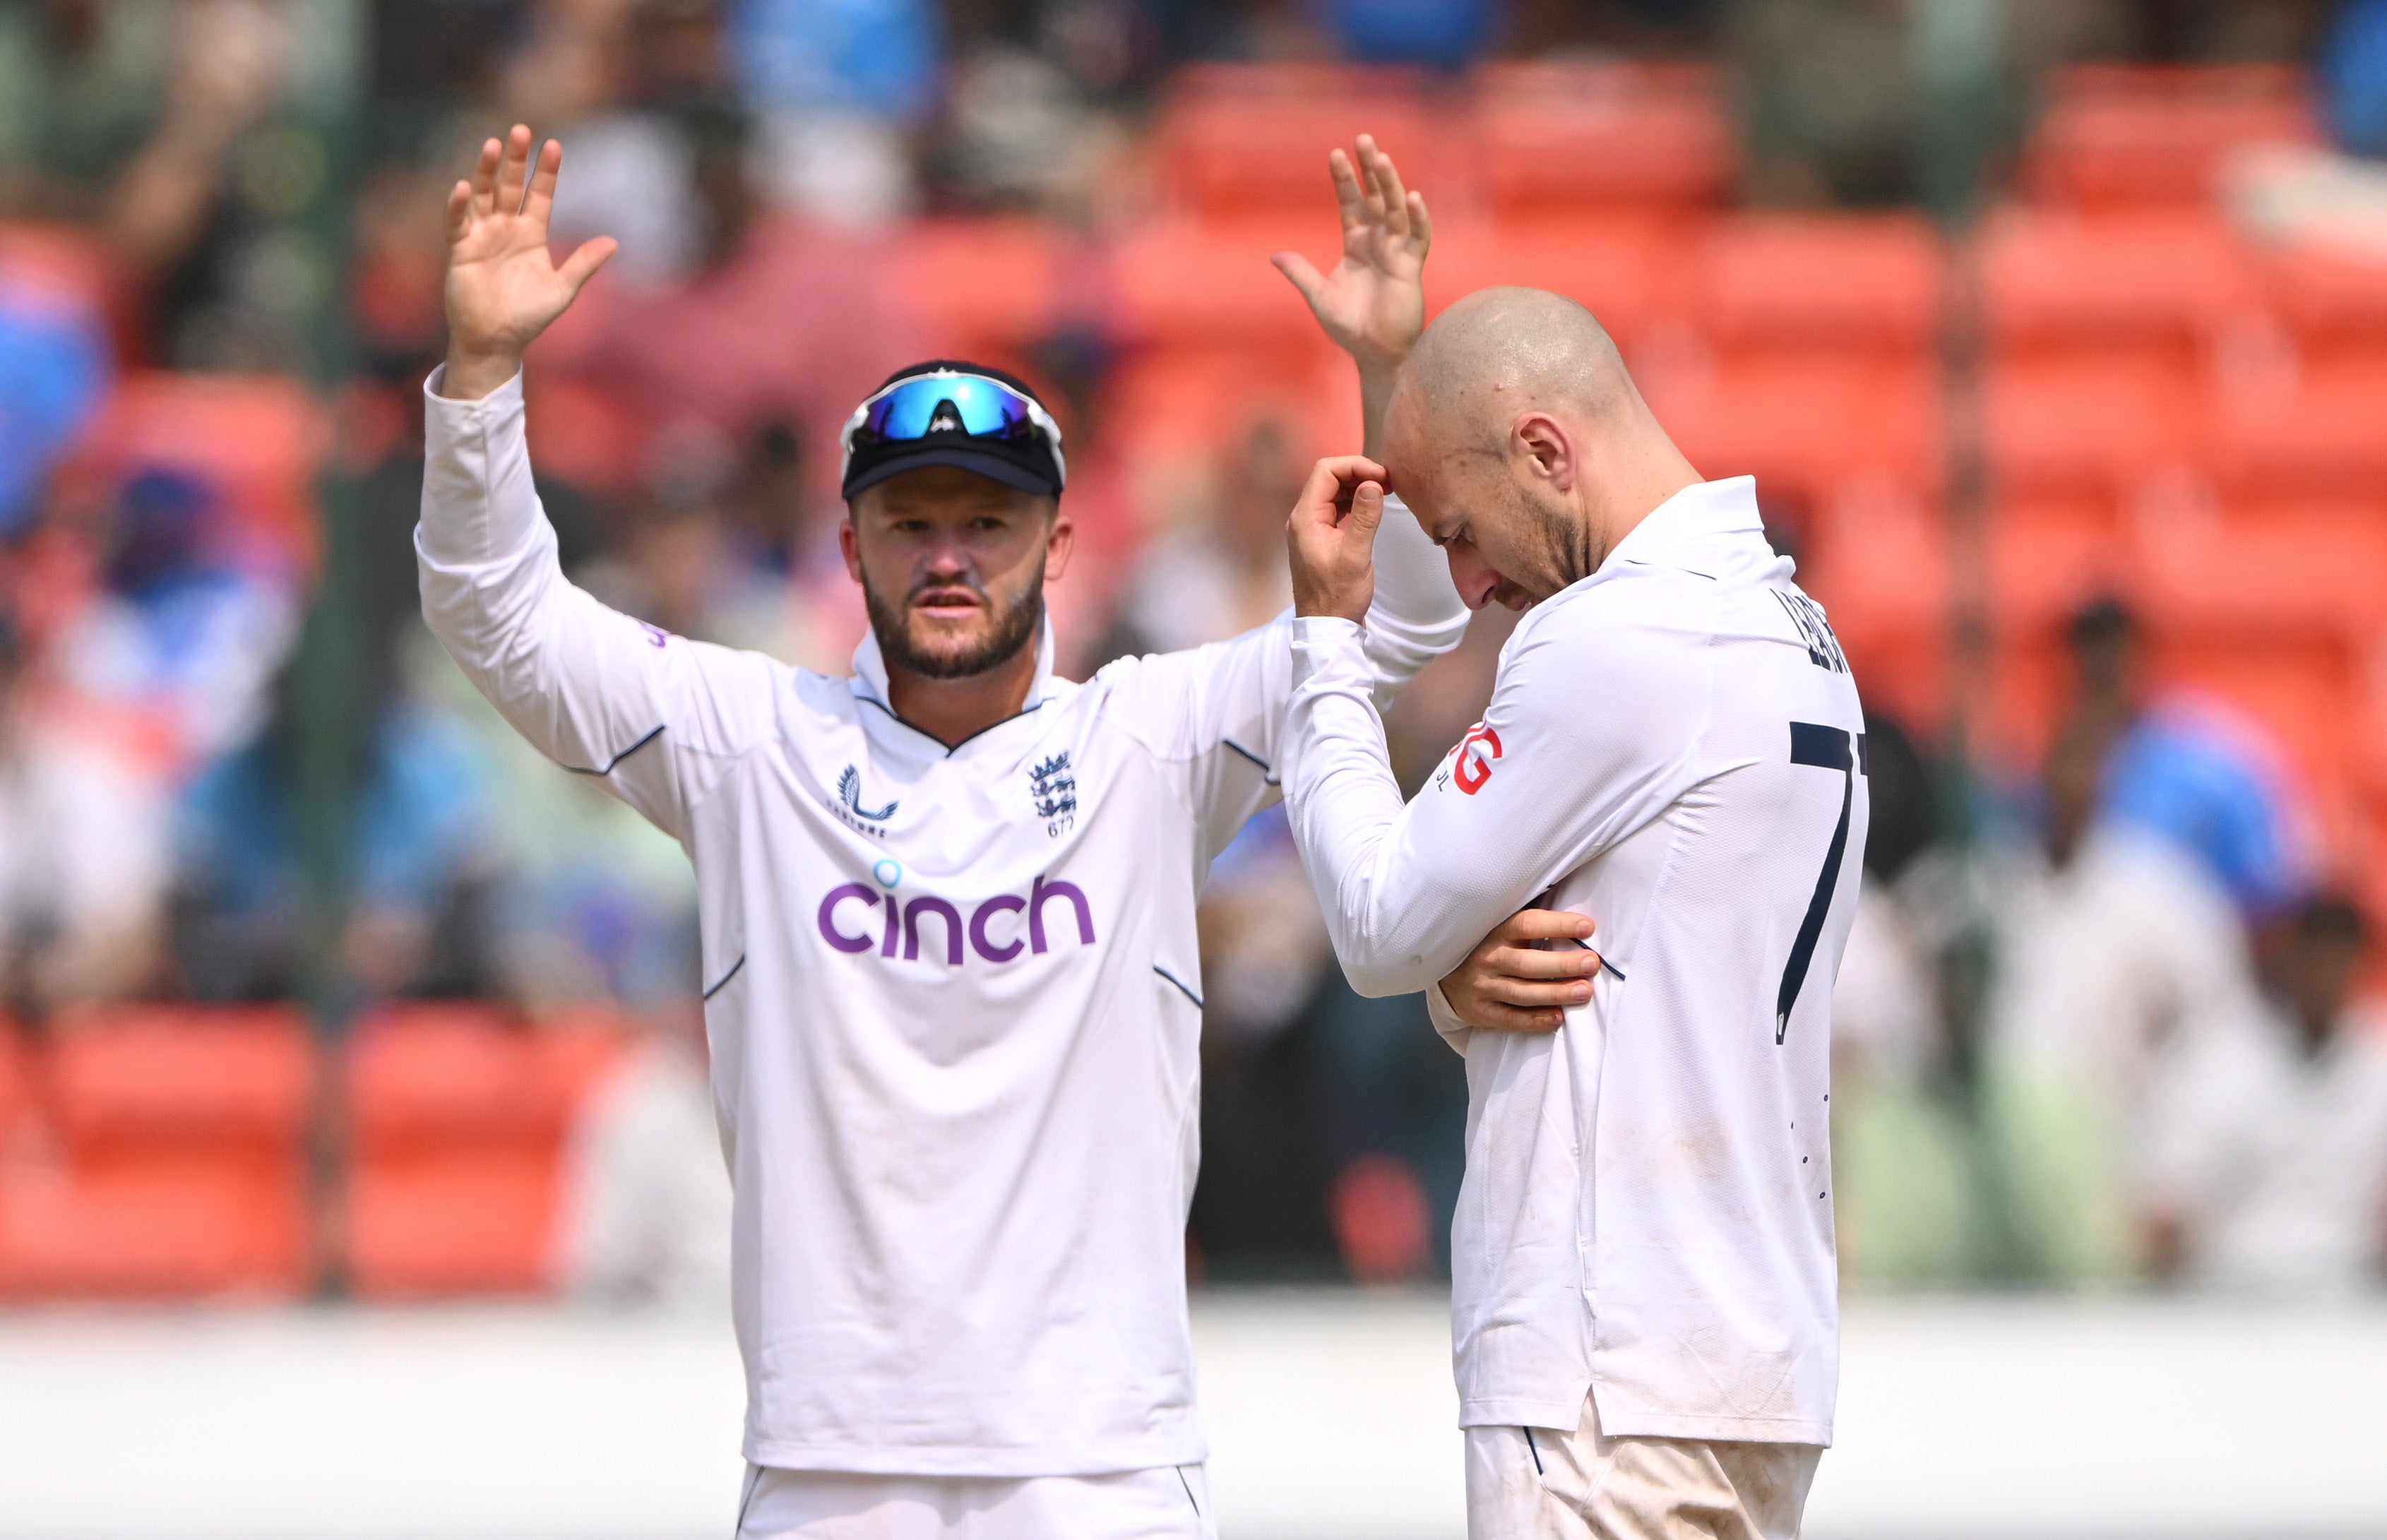 Jack Leach suffered a knock to his knee